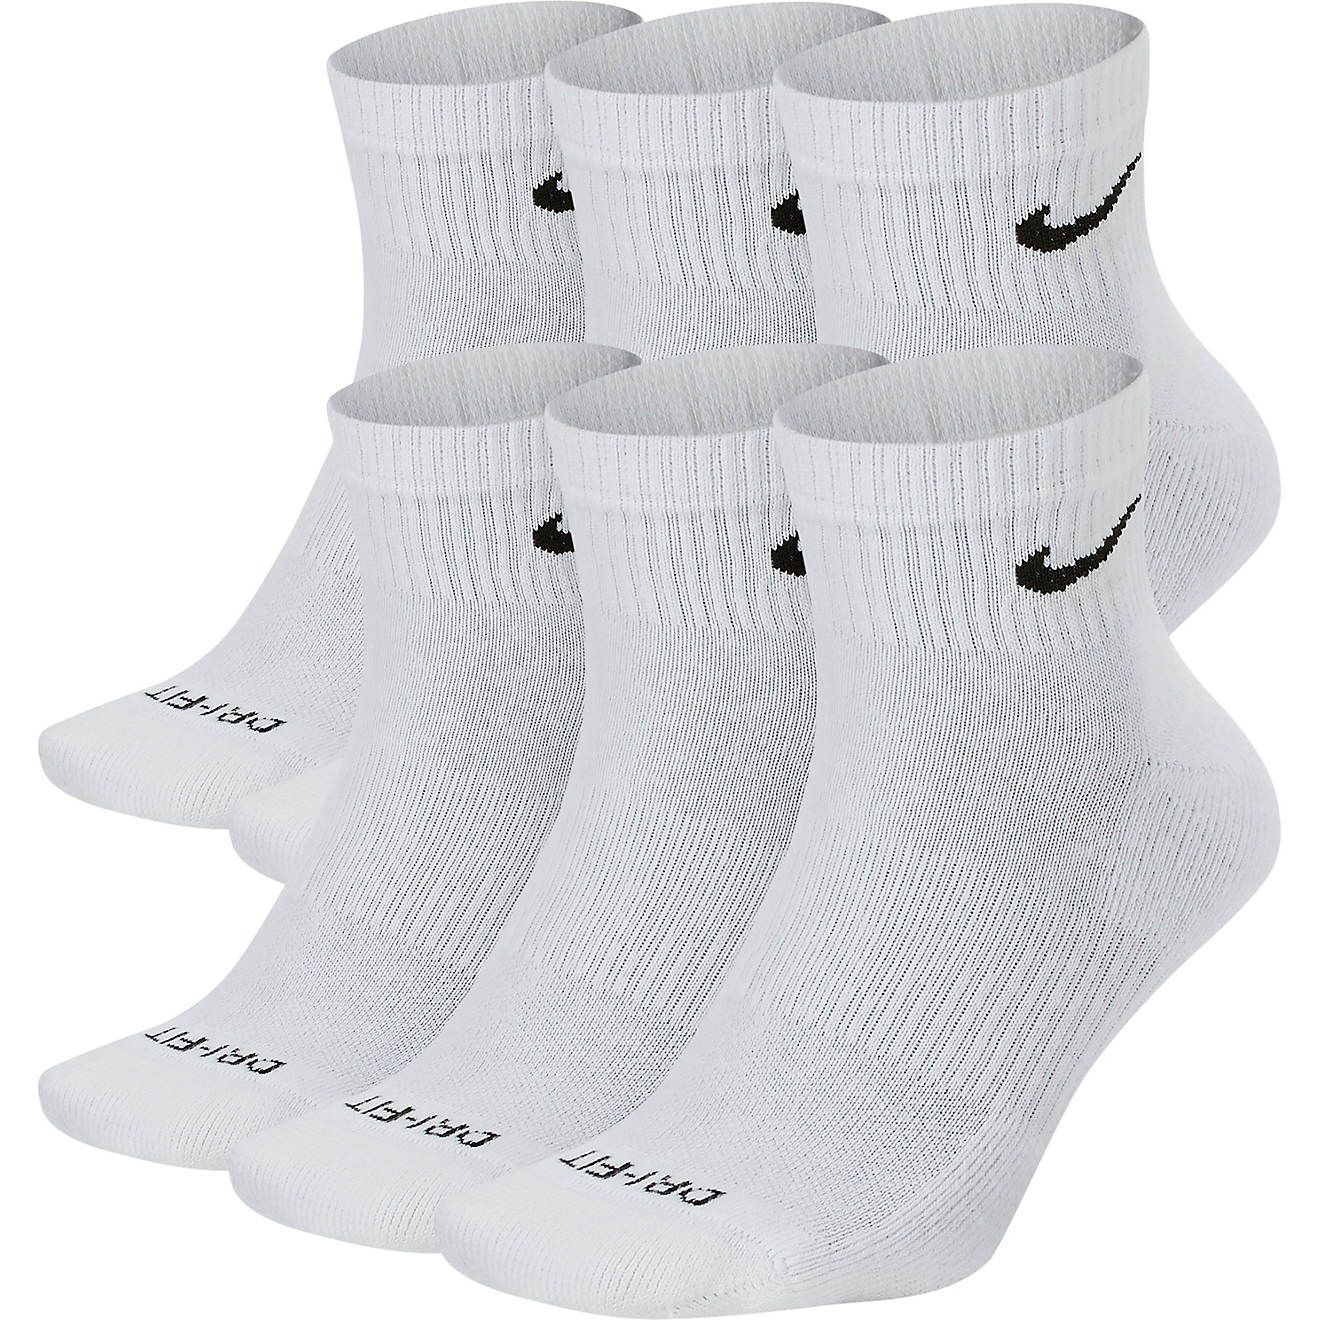 Nike Men's Everyday Plus Cushion Dri-FIT Training Ankle Socks 6 Pack | Academy Sports + Outdoors